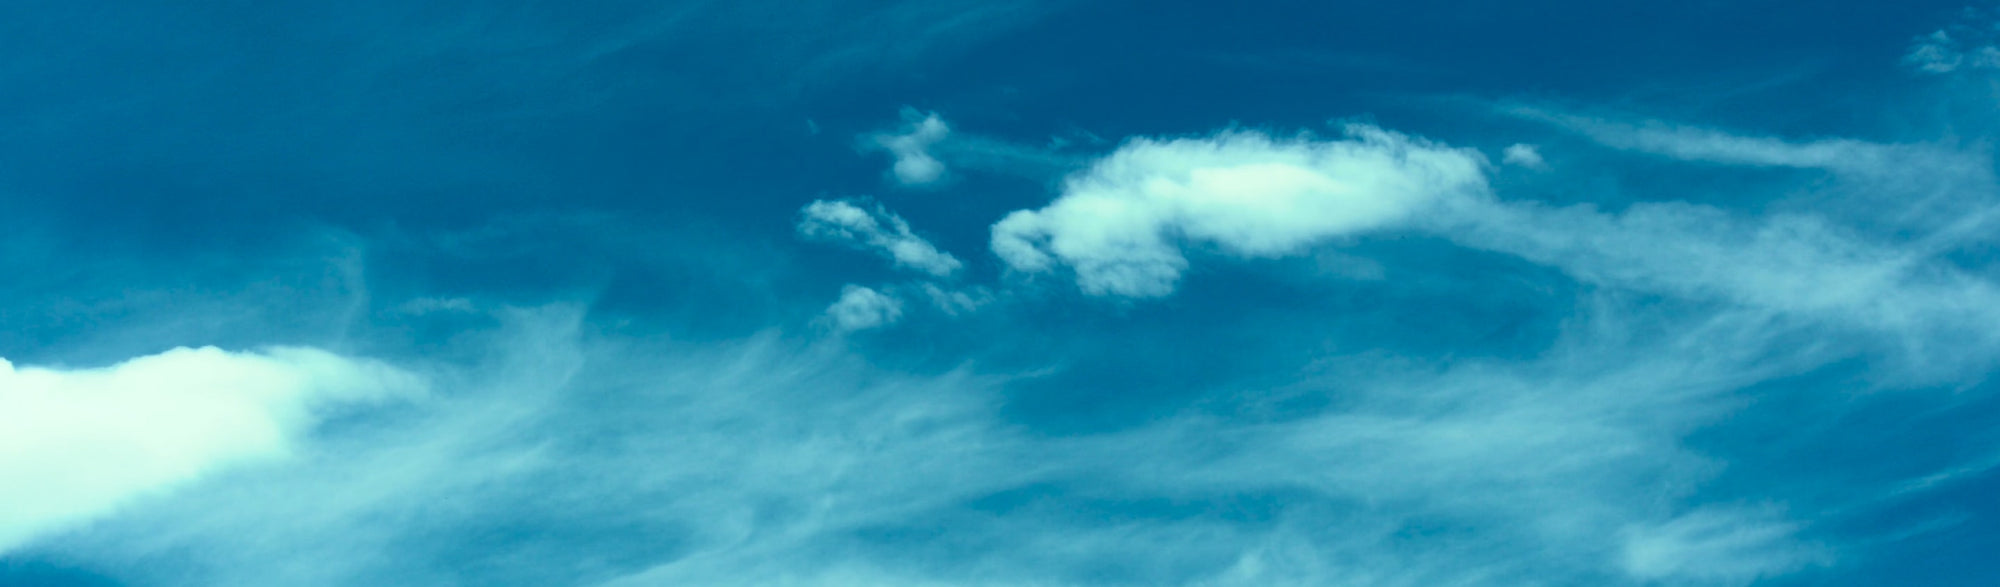 Still image of a blue sky and clouds